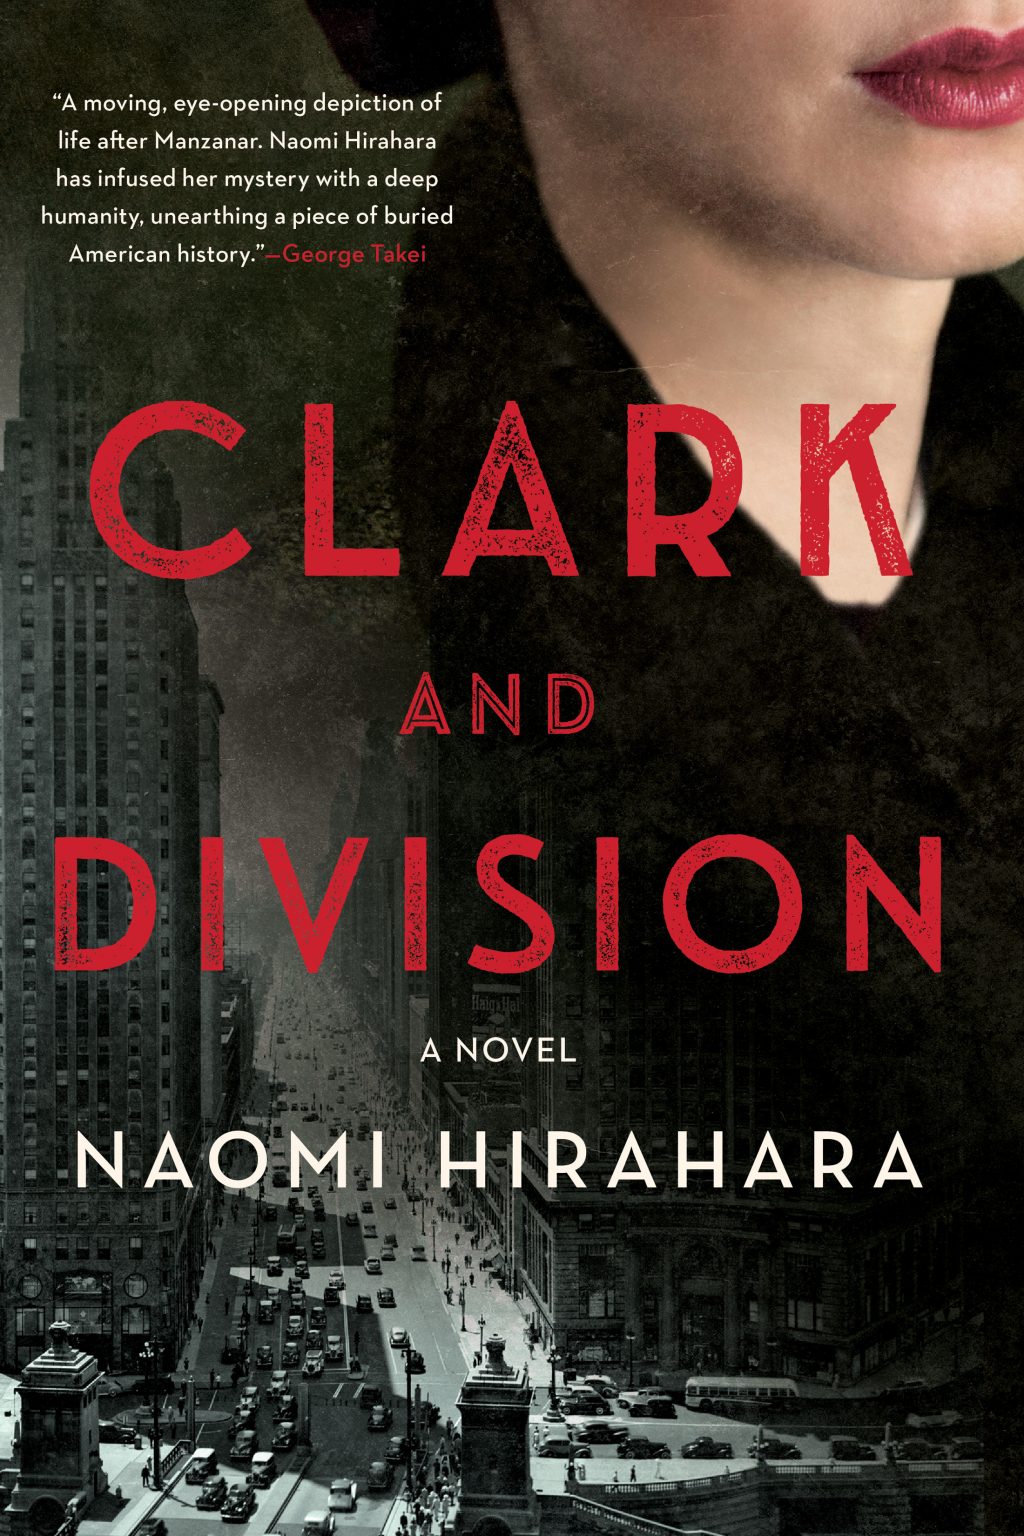 One of our recommended books is Clark and Division by Naomi Hirahara